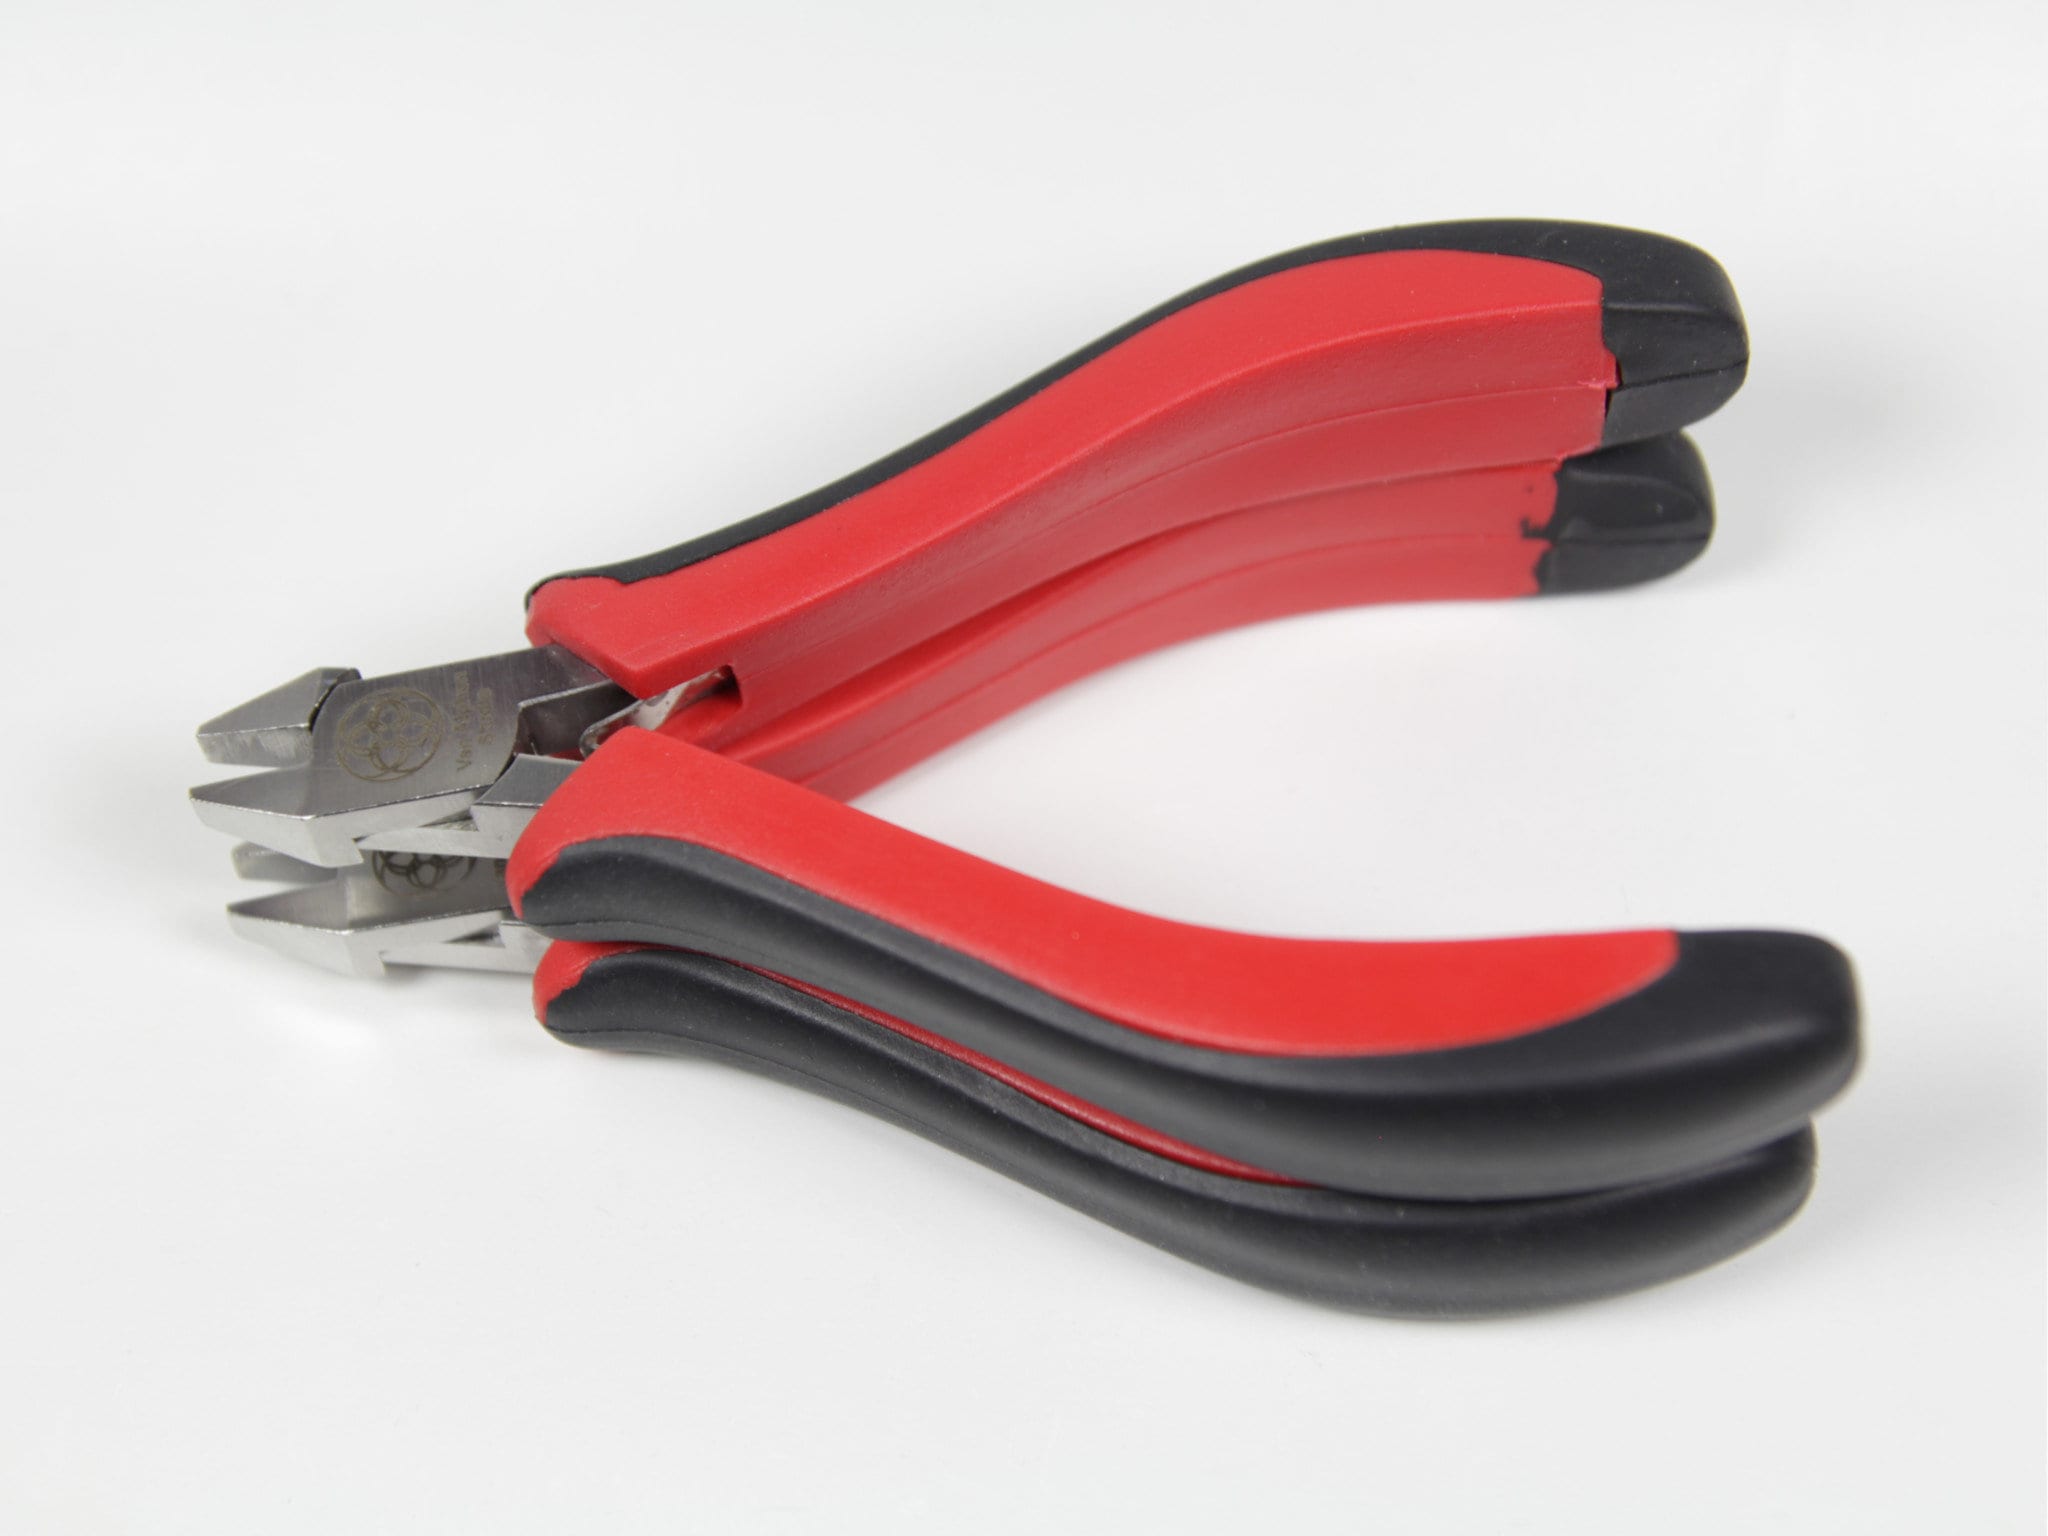 Duckbill Long Flat Nose Pliers Forming Pliers Jewelry Making Tools 